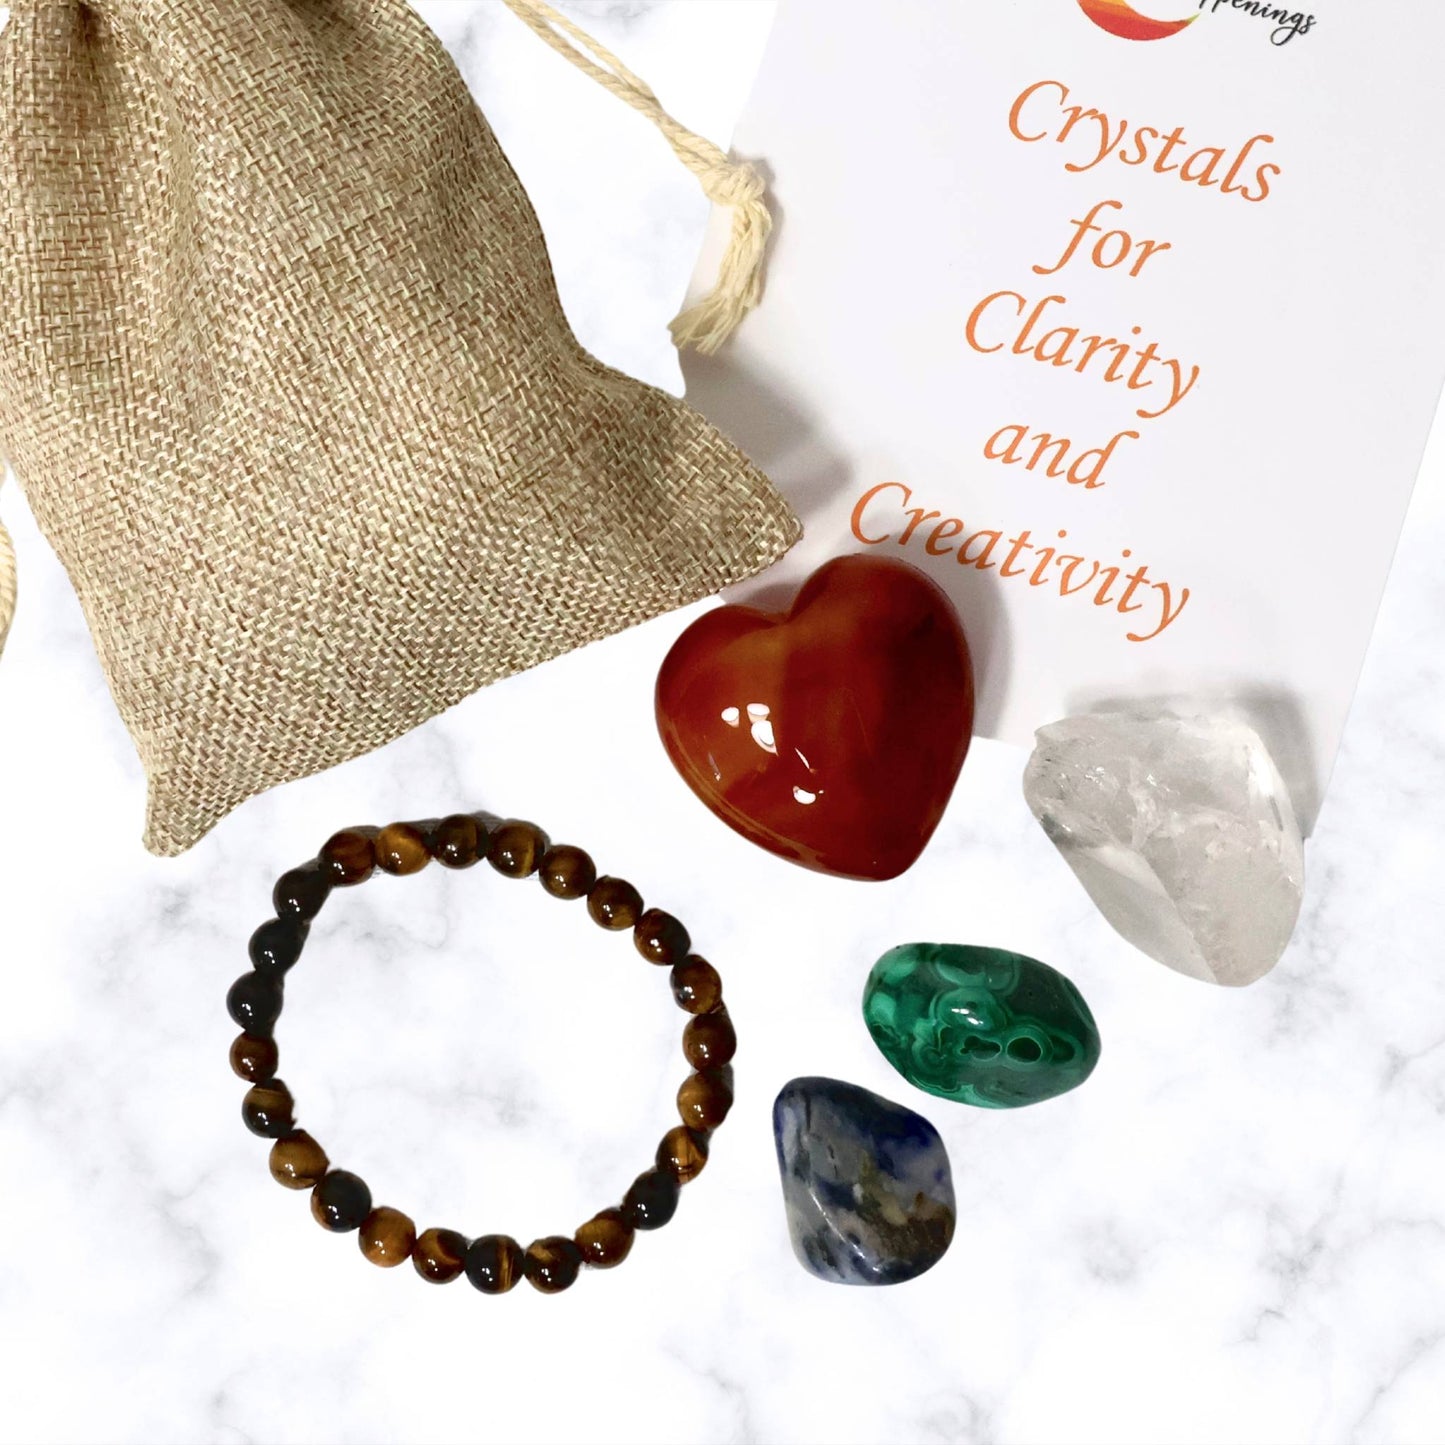 Deluxe Set of Crystals for Clarity and Creativity